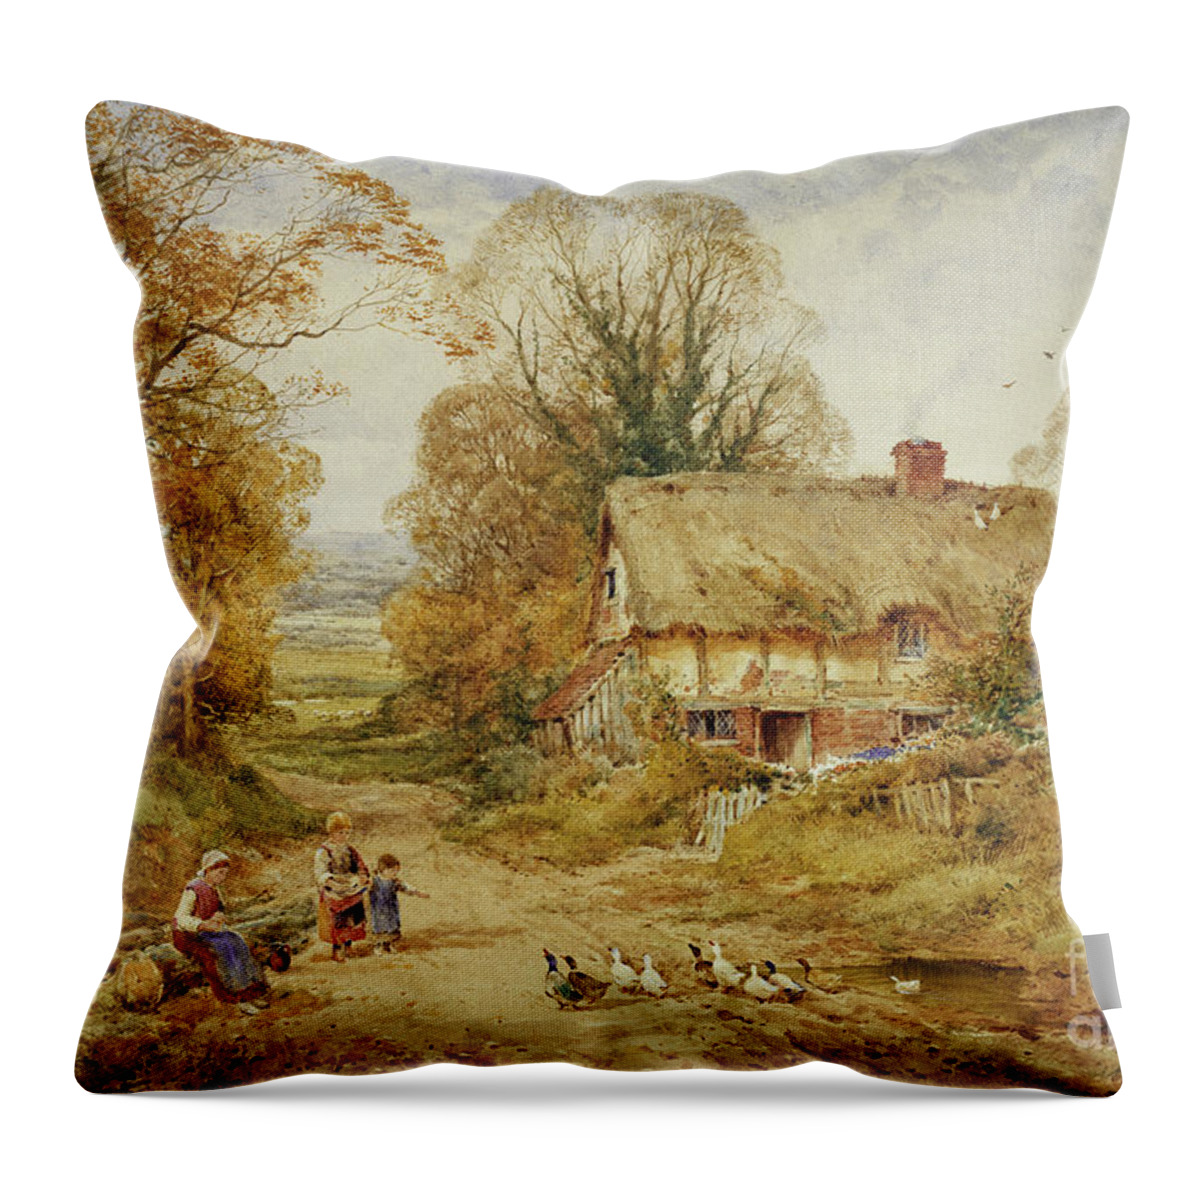 Animal Throw Pillow featuring the painting Children Feeding Ducks Beside A Cottage In A Wooded Lane by Henry John Sylvester Stannard